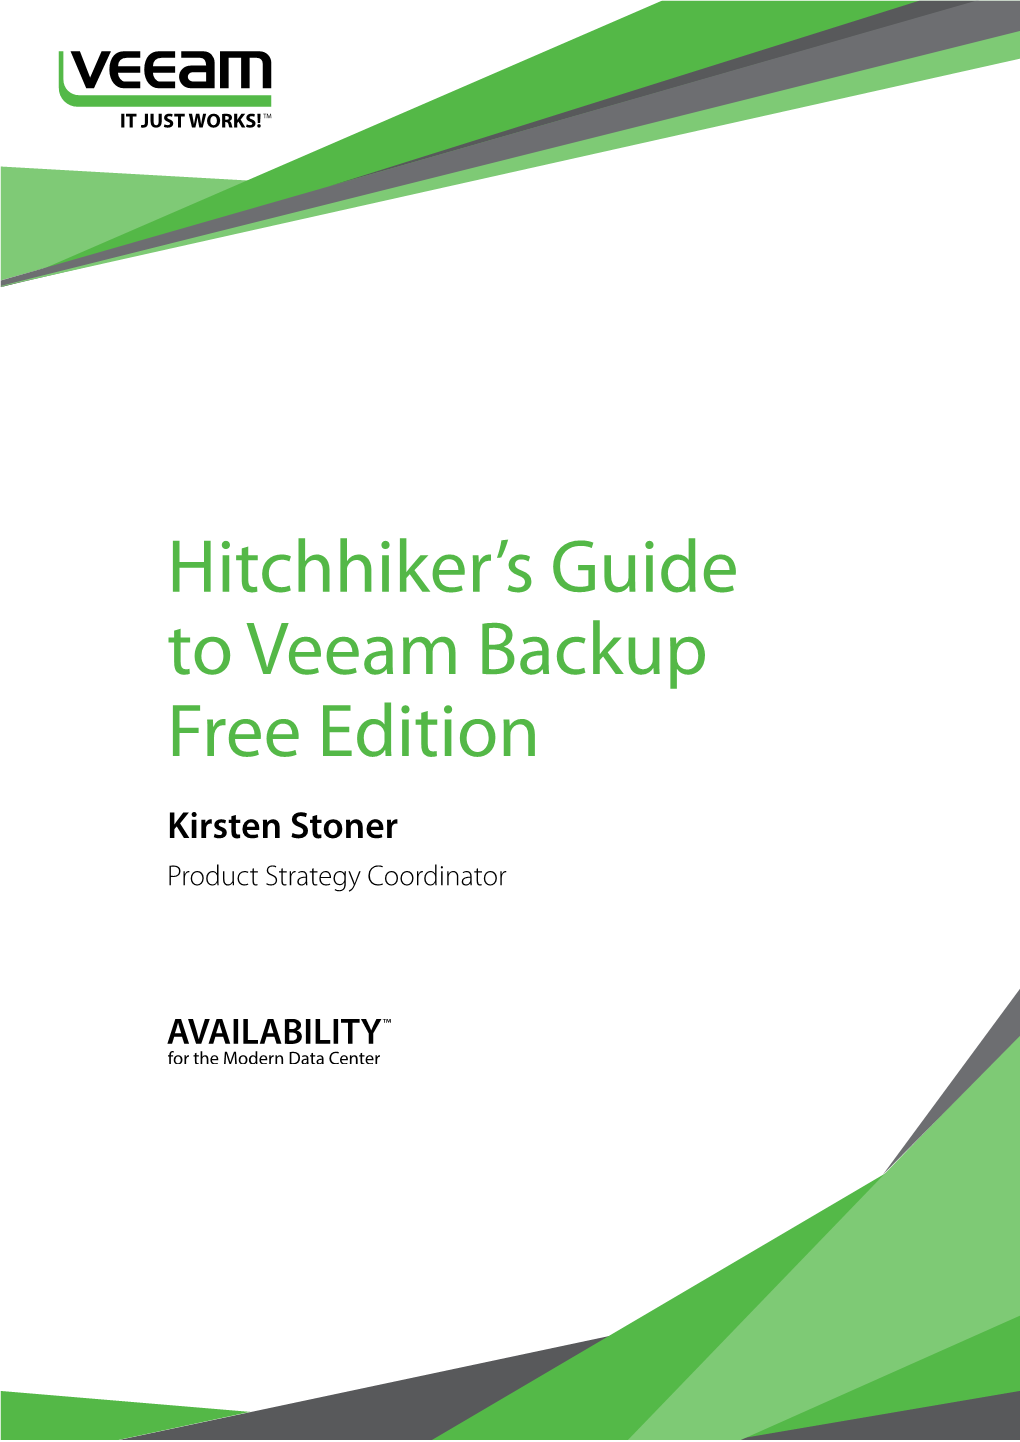 Hitchhiker's Guide to Veeam Backup Free Edition